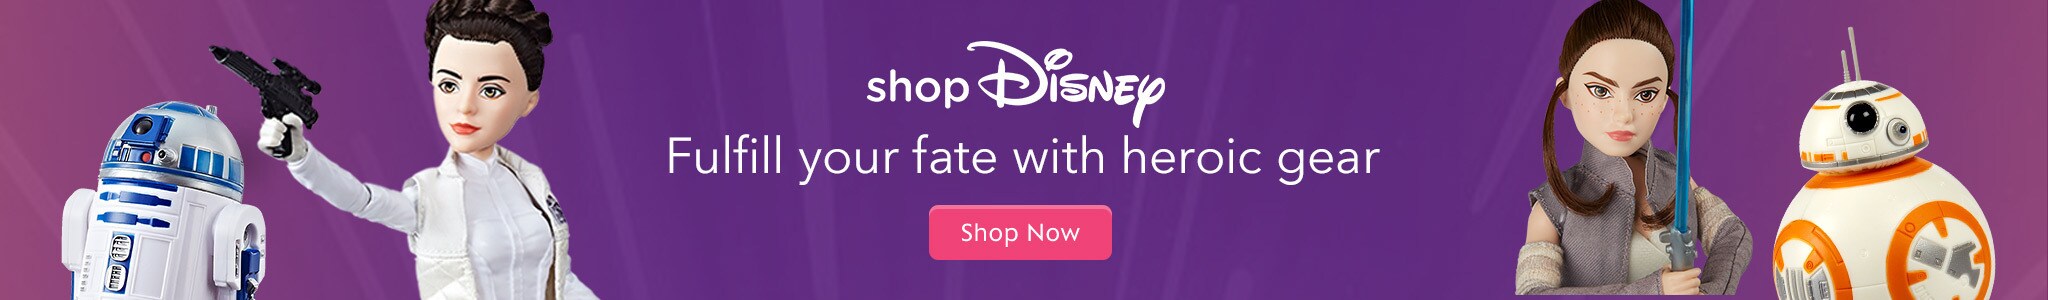 Shop for Forces of Destiny products at the Disney Store